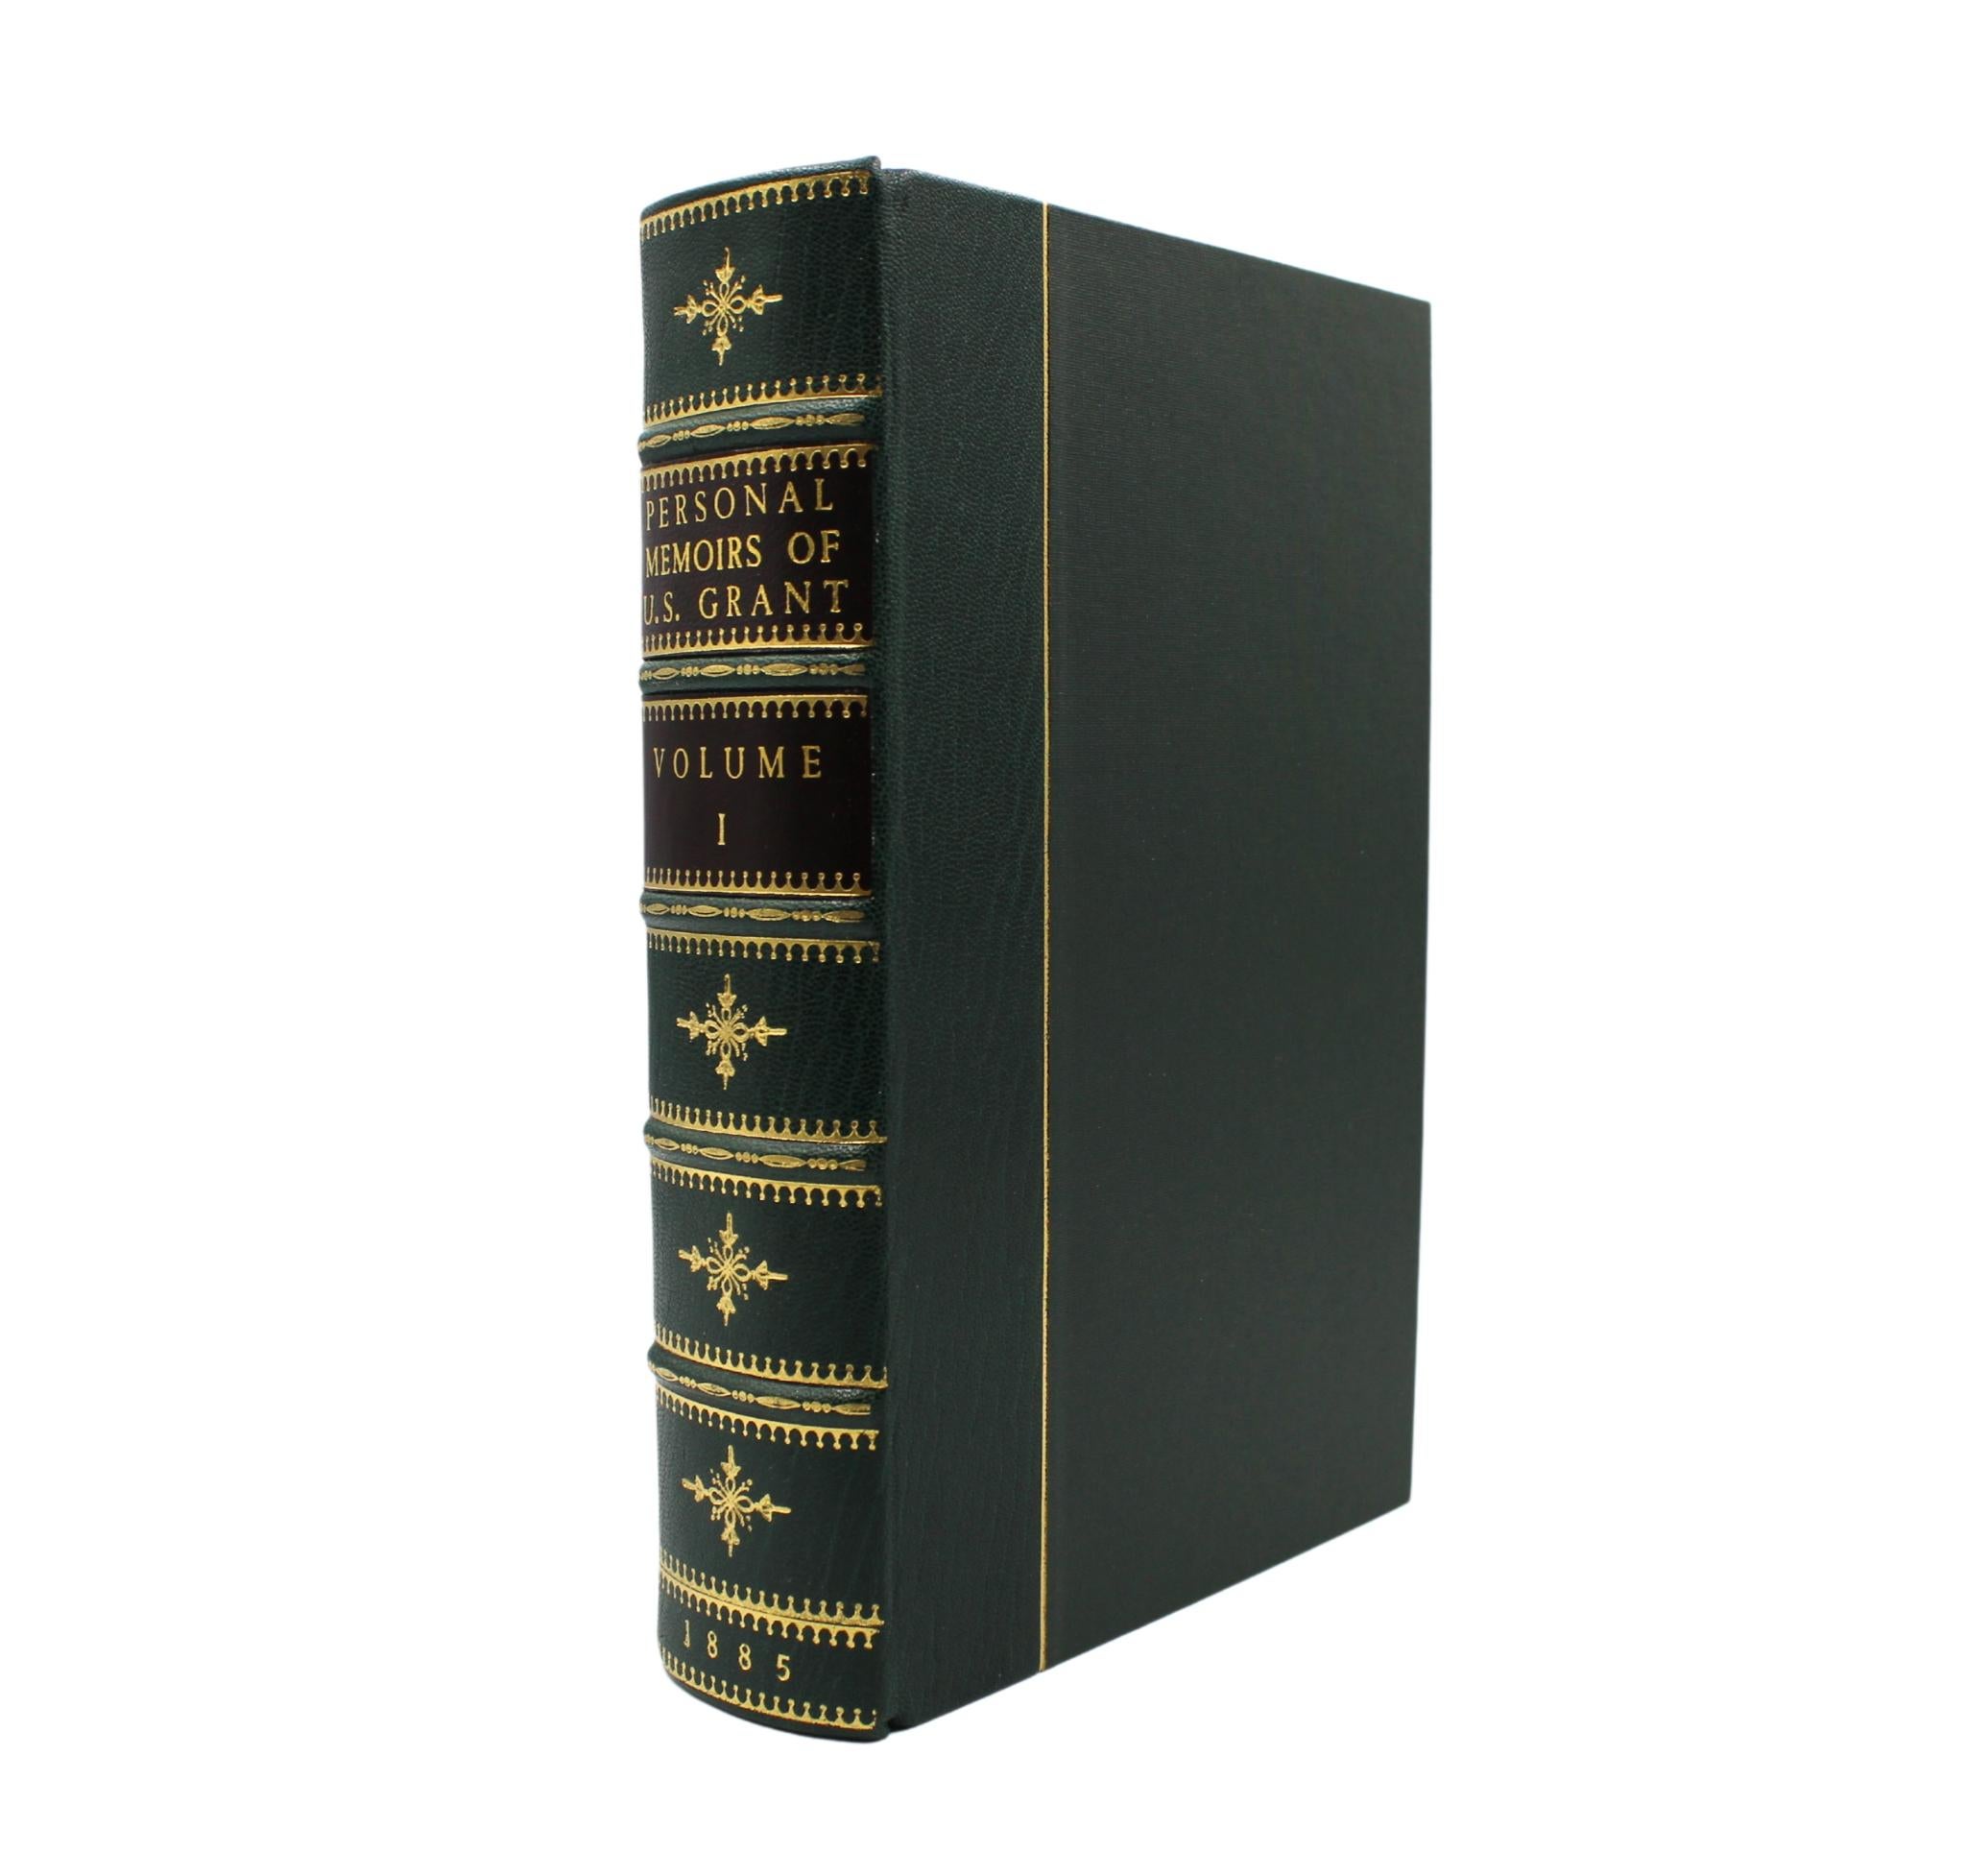 Personal Memoirs of U. S. Grant, Two-Volume Set, 1885-86 In Good Condition For Sale In Colorado Springs, CO